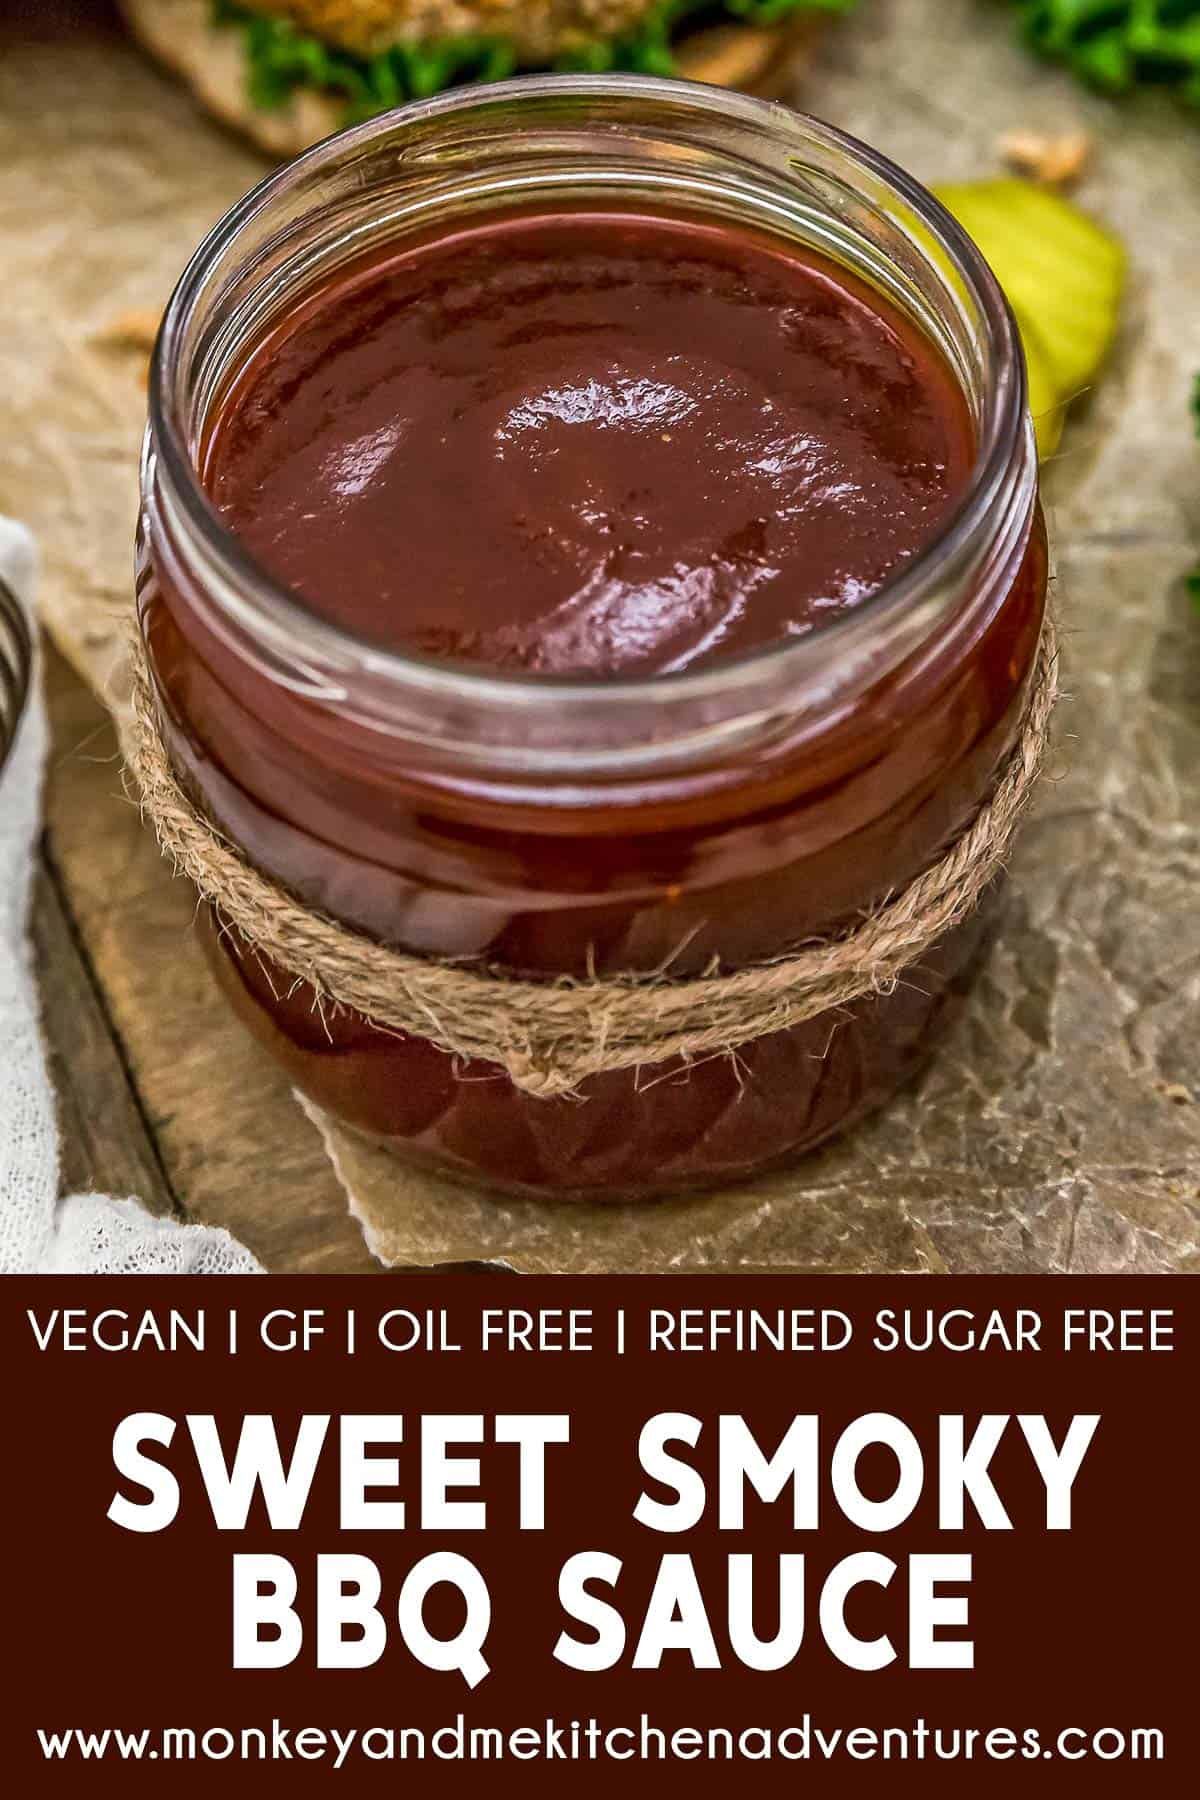 Sweet and Smoky BBQ Sauce with text description